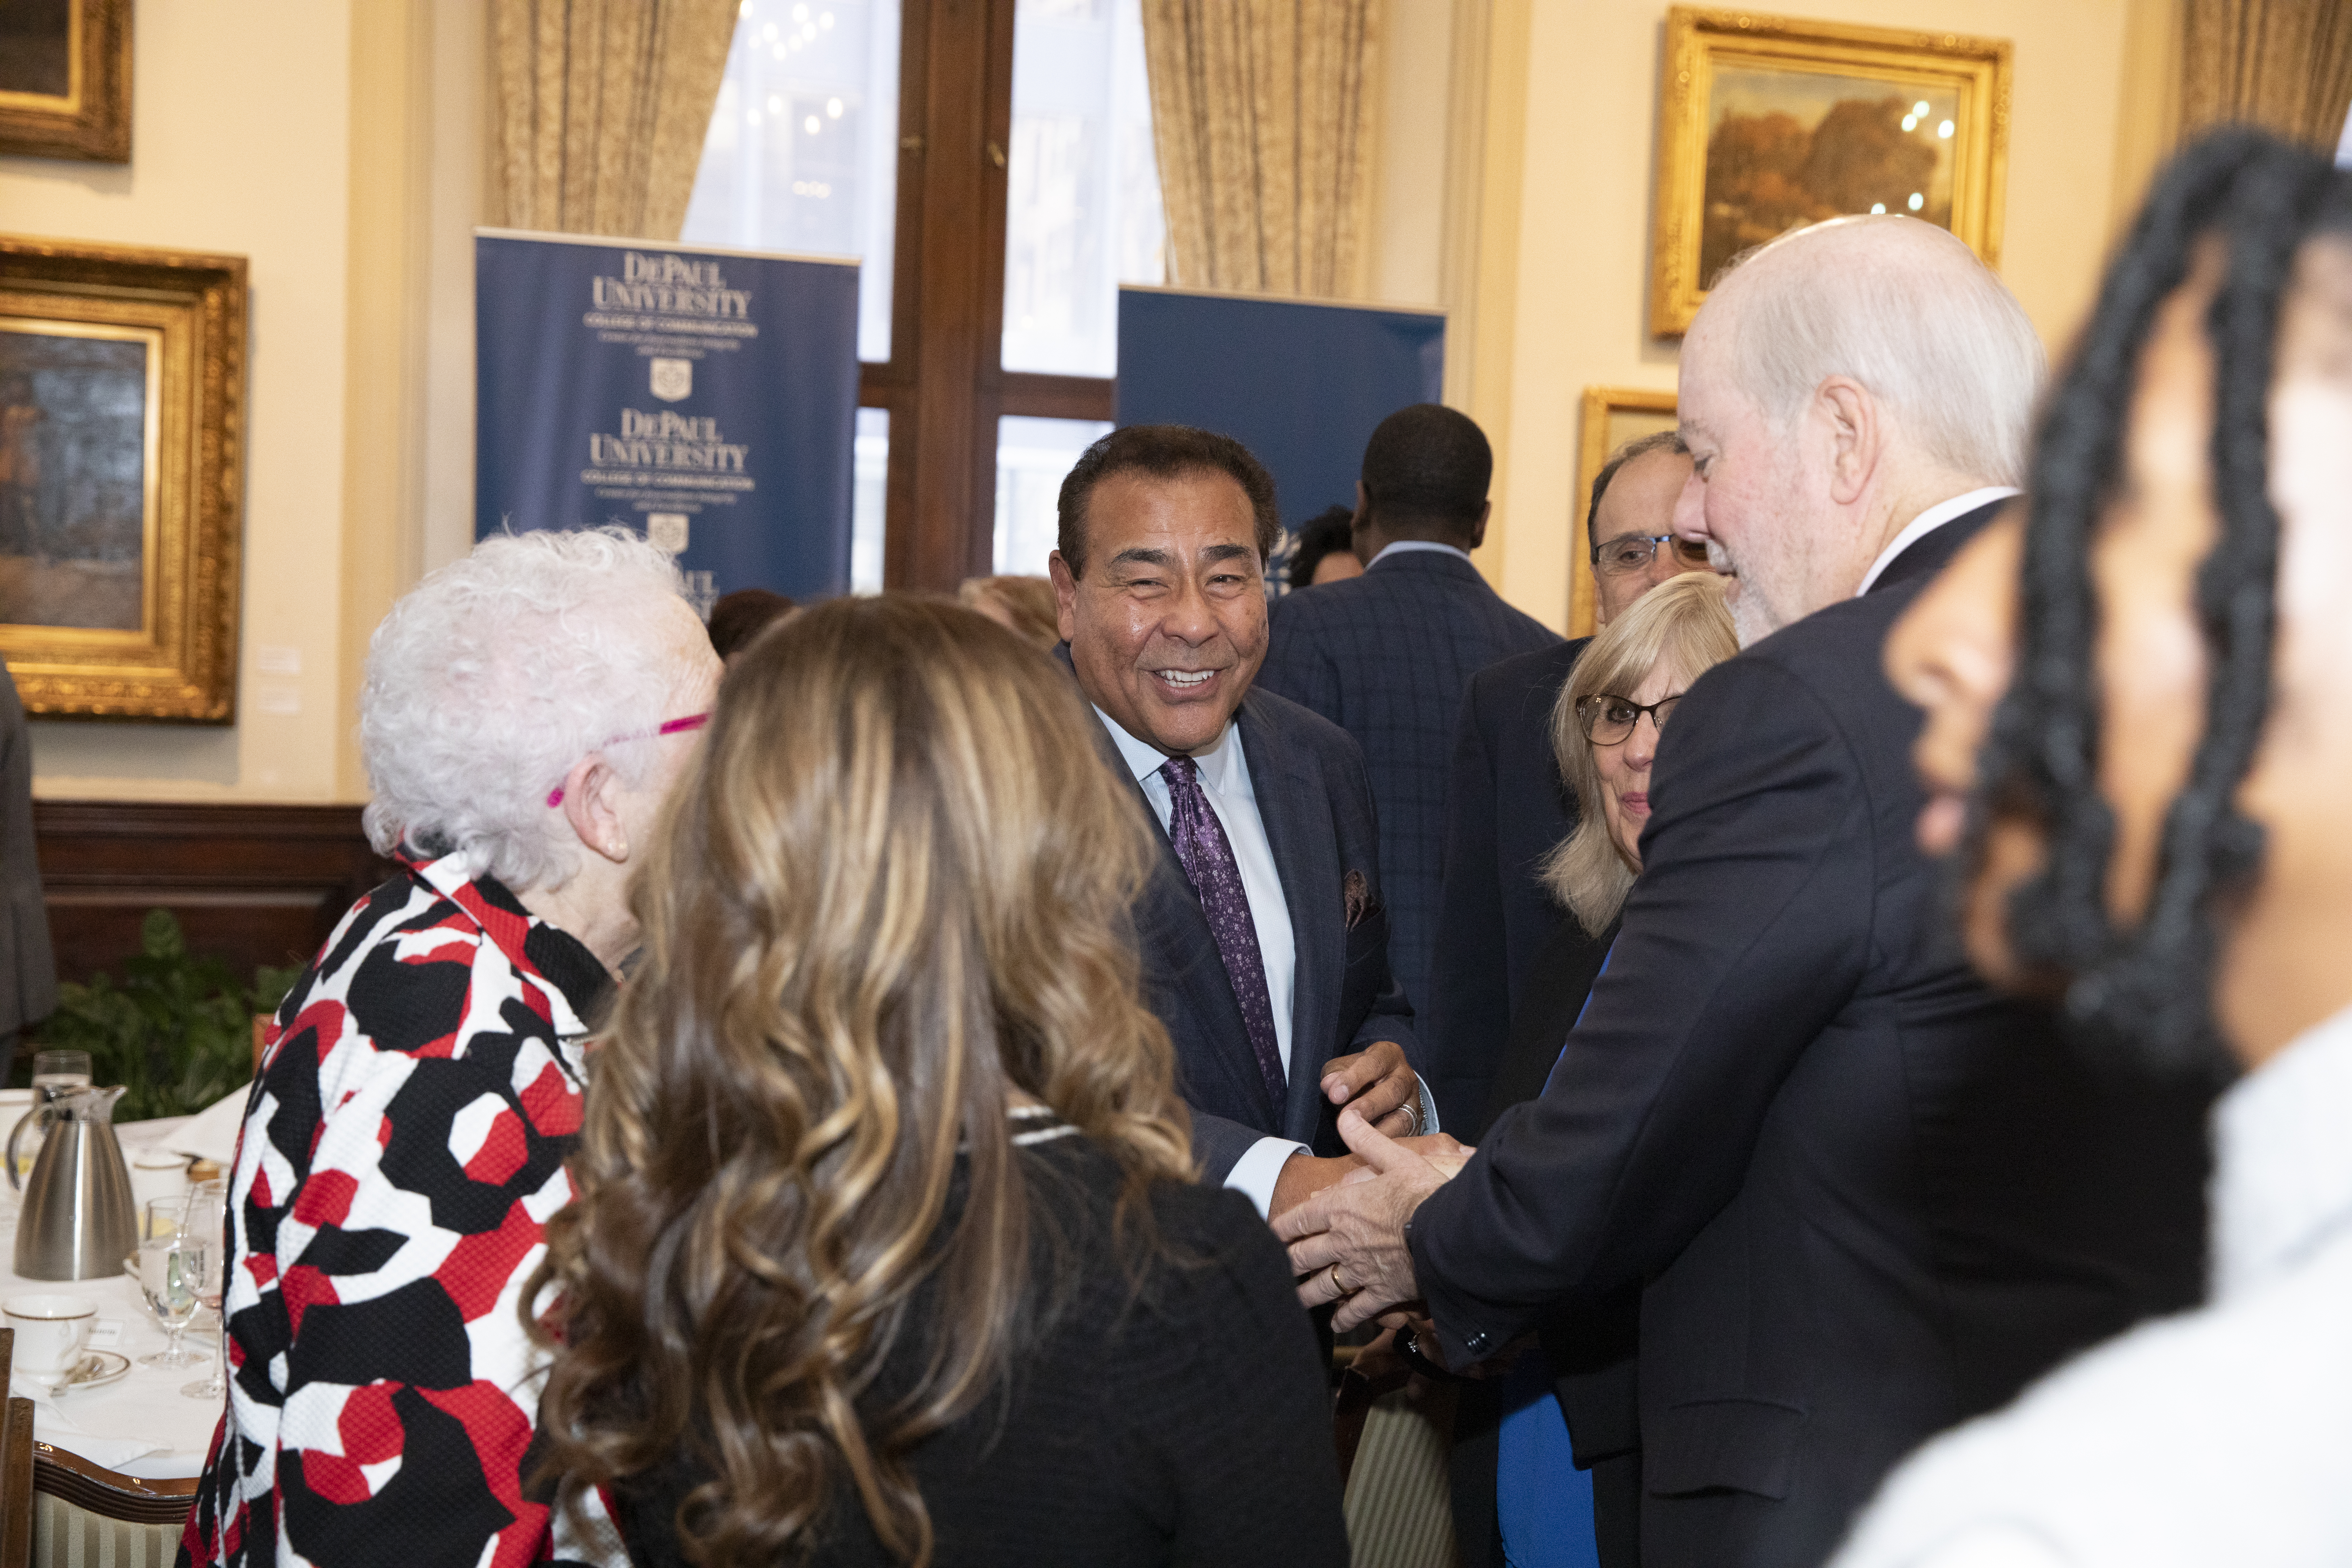 John Quiñones shakes hands with attendees